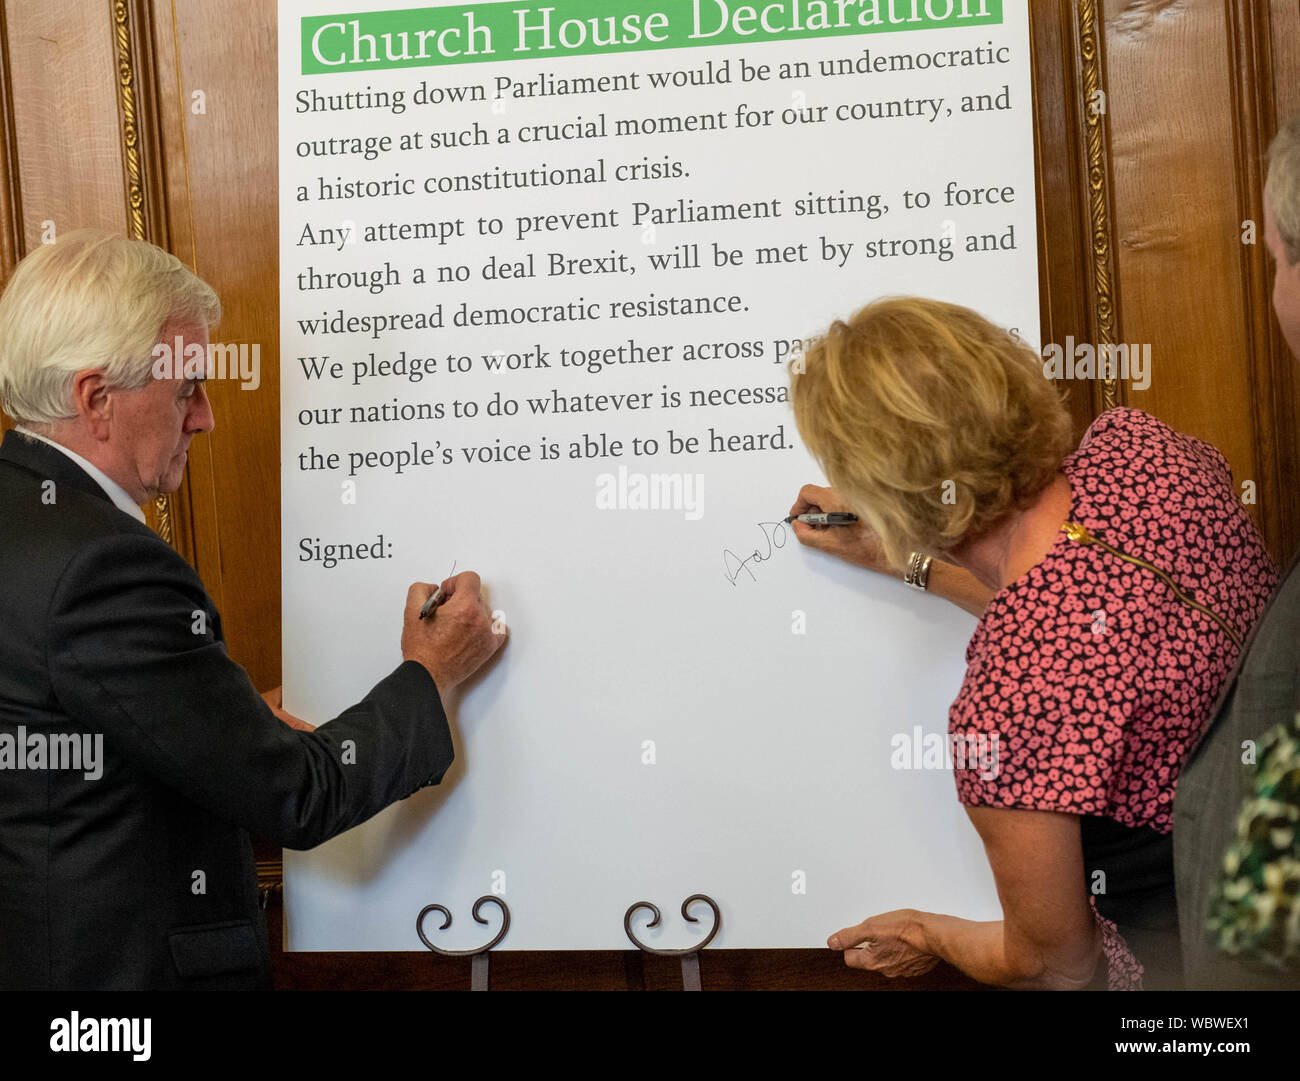 London, UK. 27 August 2019.  Church House declaration meeting of UK opposition leaders and MP's signing a declaration against the shutting down of parliament by Boris Johnson MP PC Prime Minister. John McDonnell MP Shadow Chancellor and Anna Soubry MP sign the Declaration  Credit Ian DavidsonAlamy Live News Stock Photo